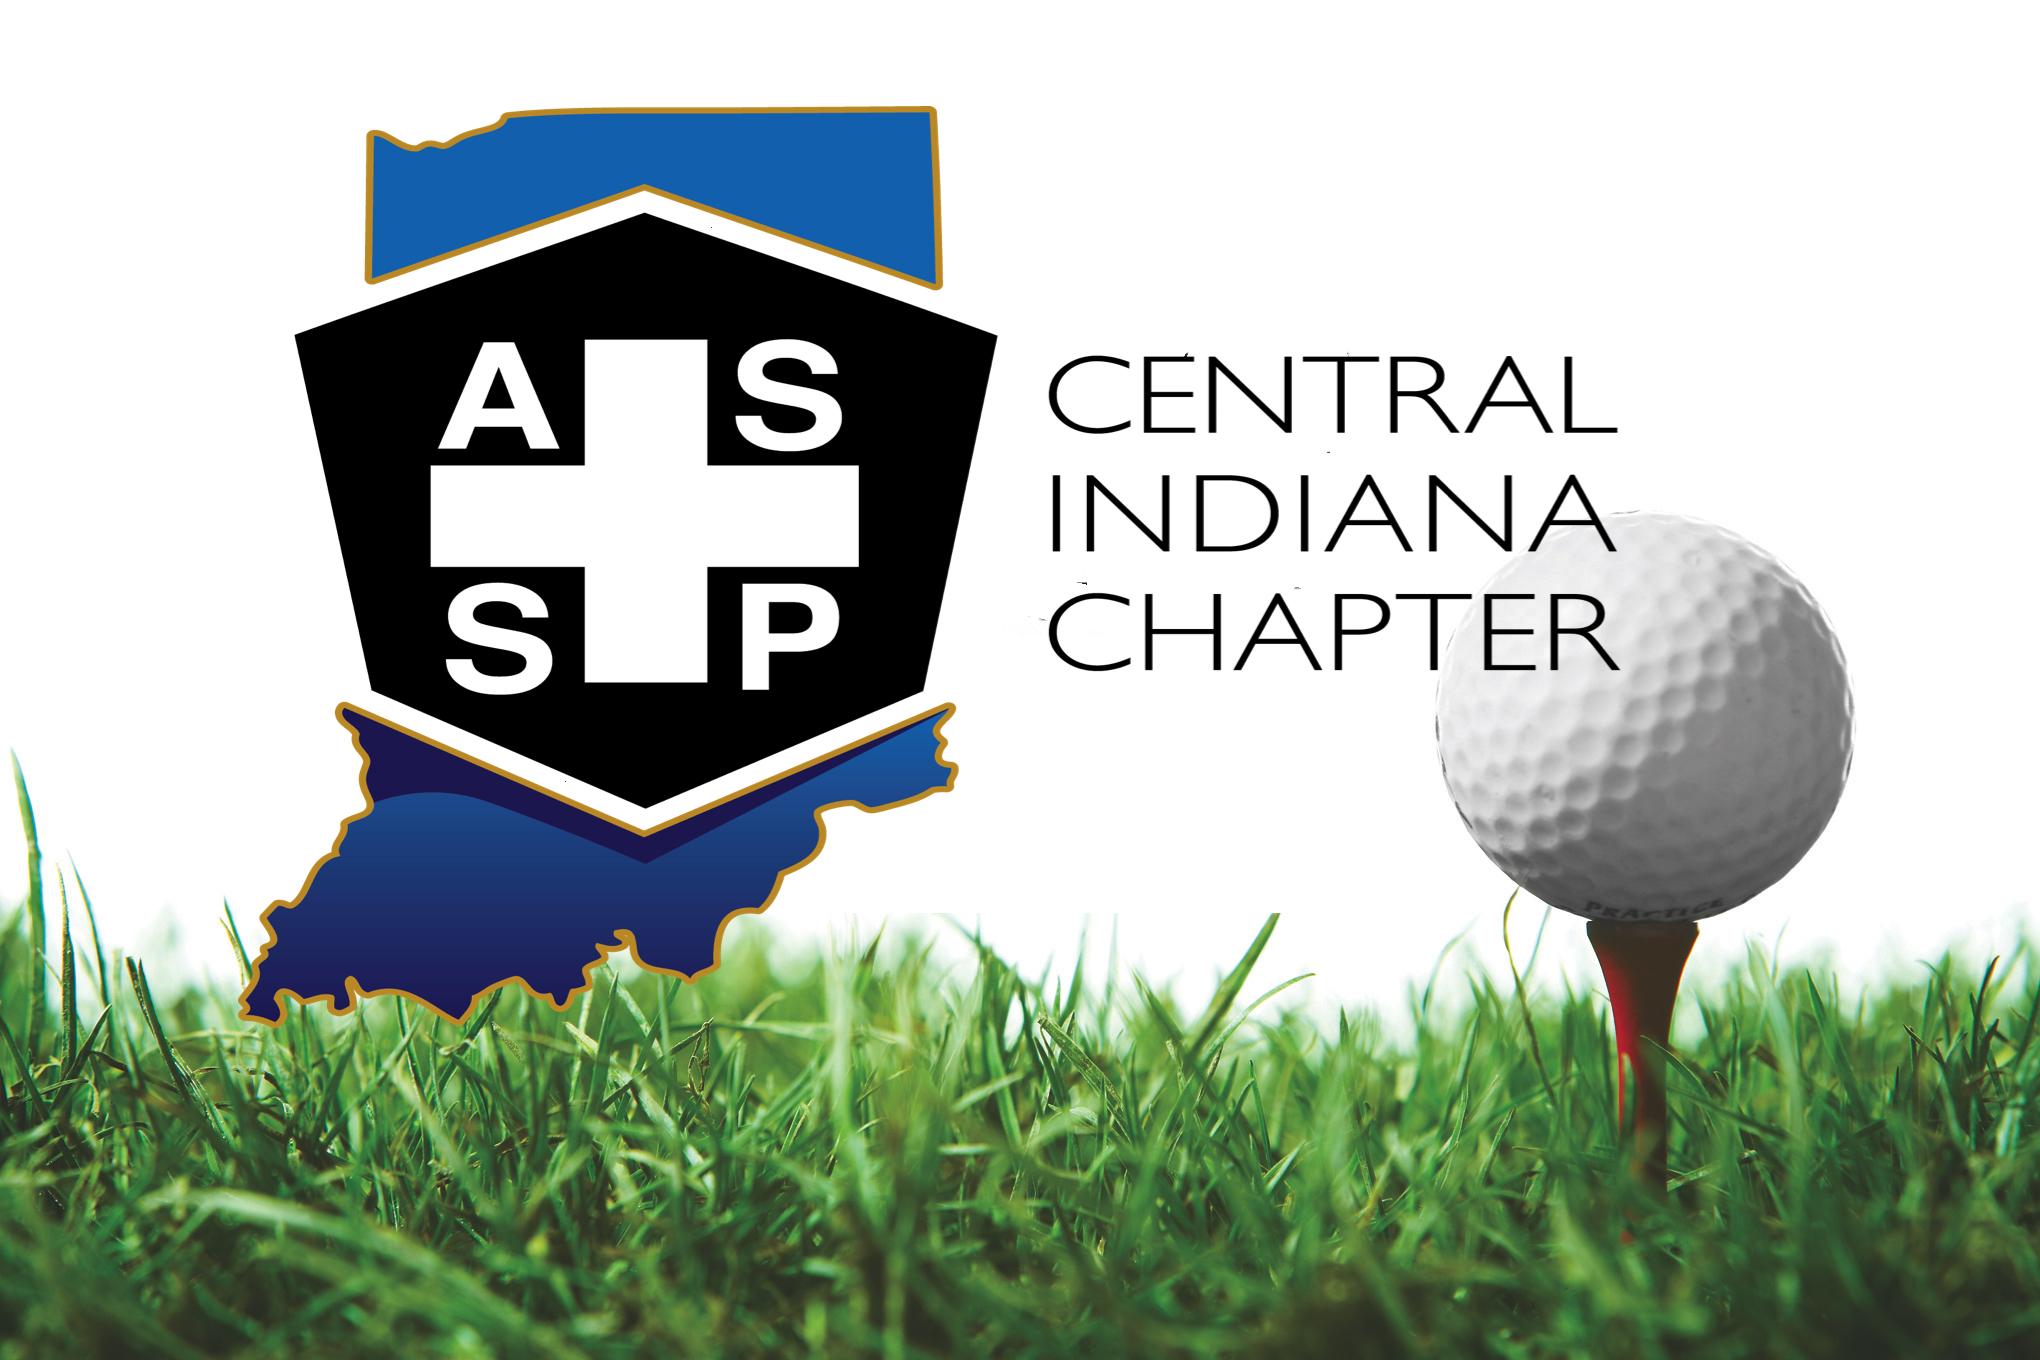 7th Annual Scholarship Golf Outing - Future Safety Leaders (August 2, 2019)